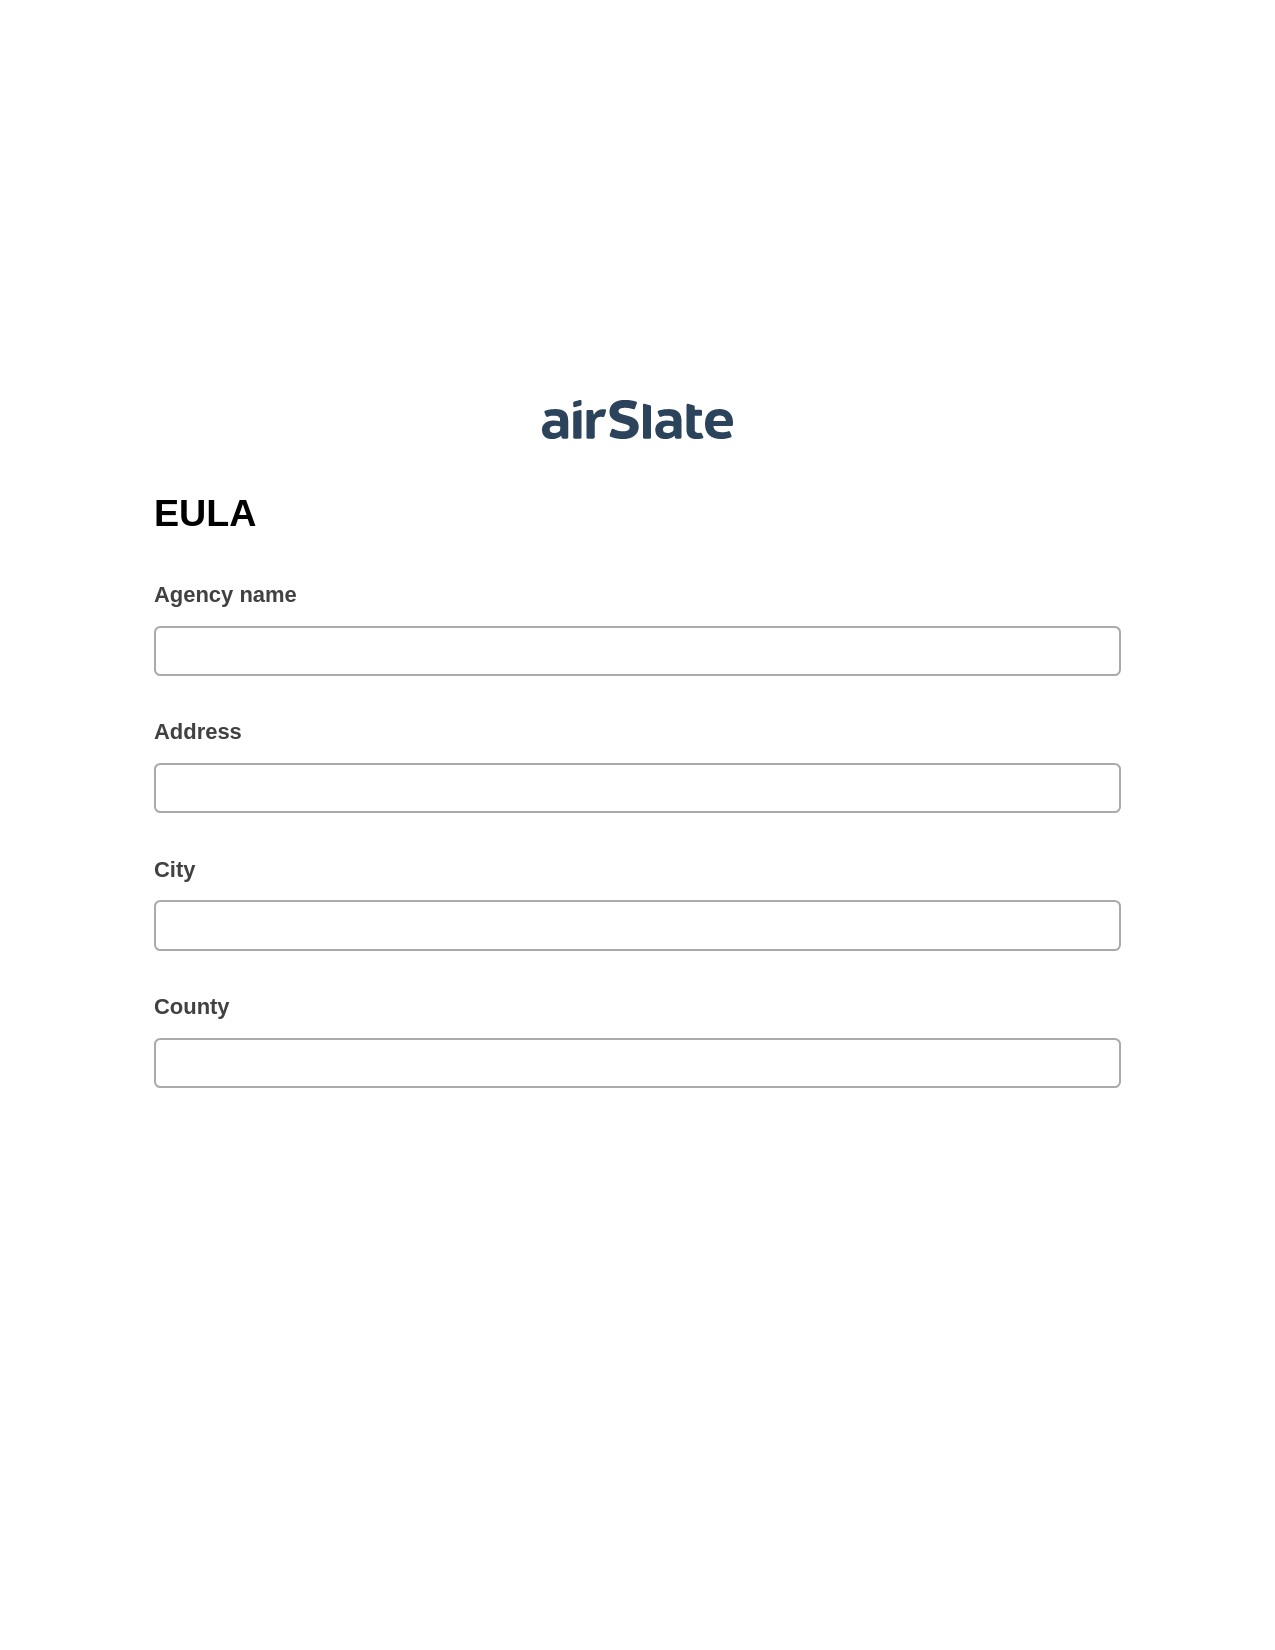 EULA Pre-fill Slate from MS Dynamics 365 Records Bot, Reminder Bot, Export to Google Sheet Bot